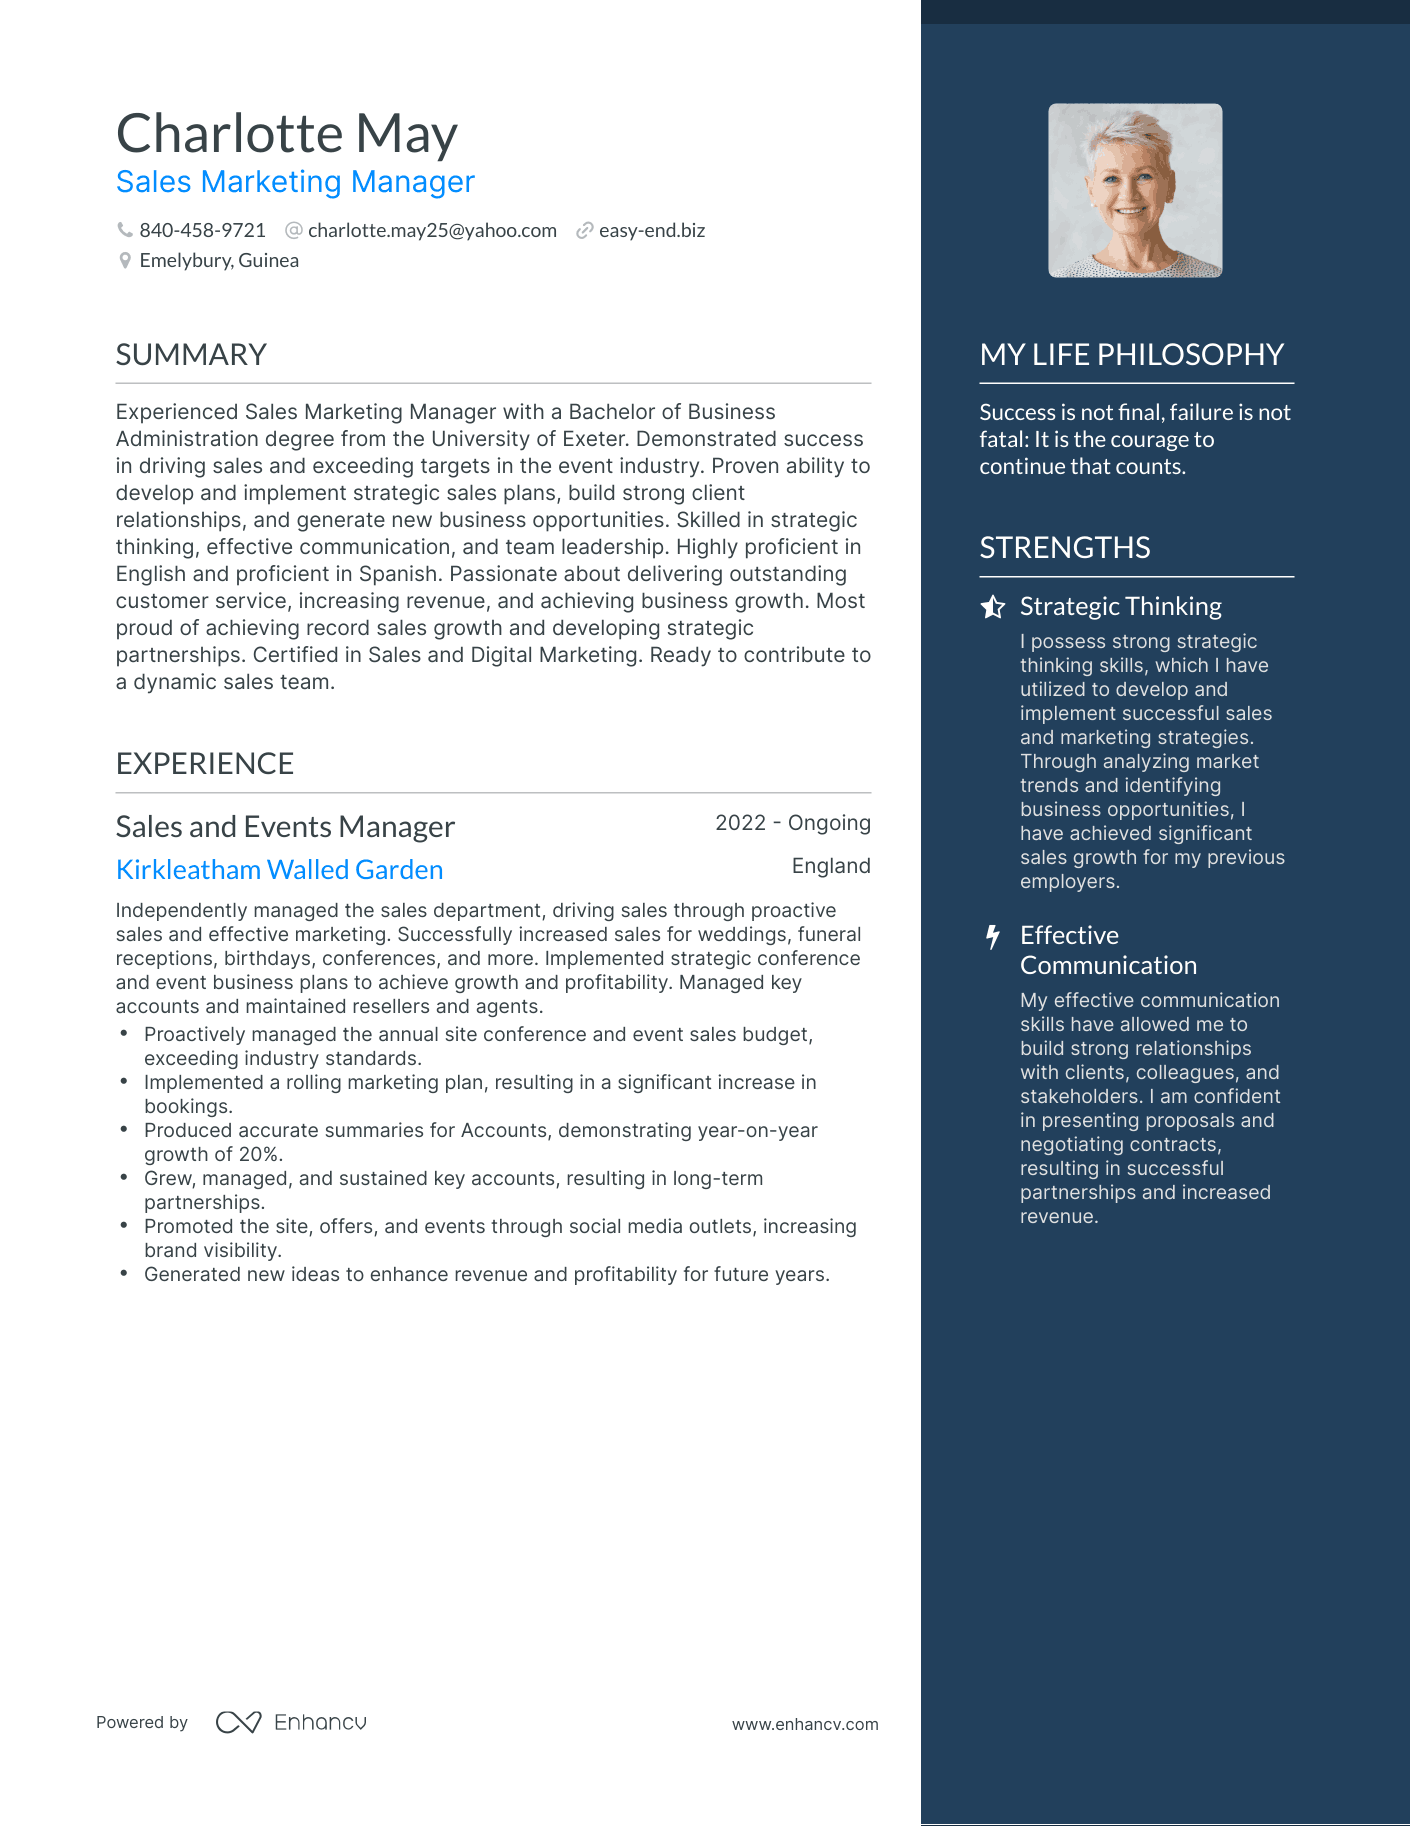 Sales Marketing Manager resume example